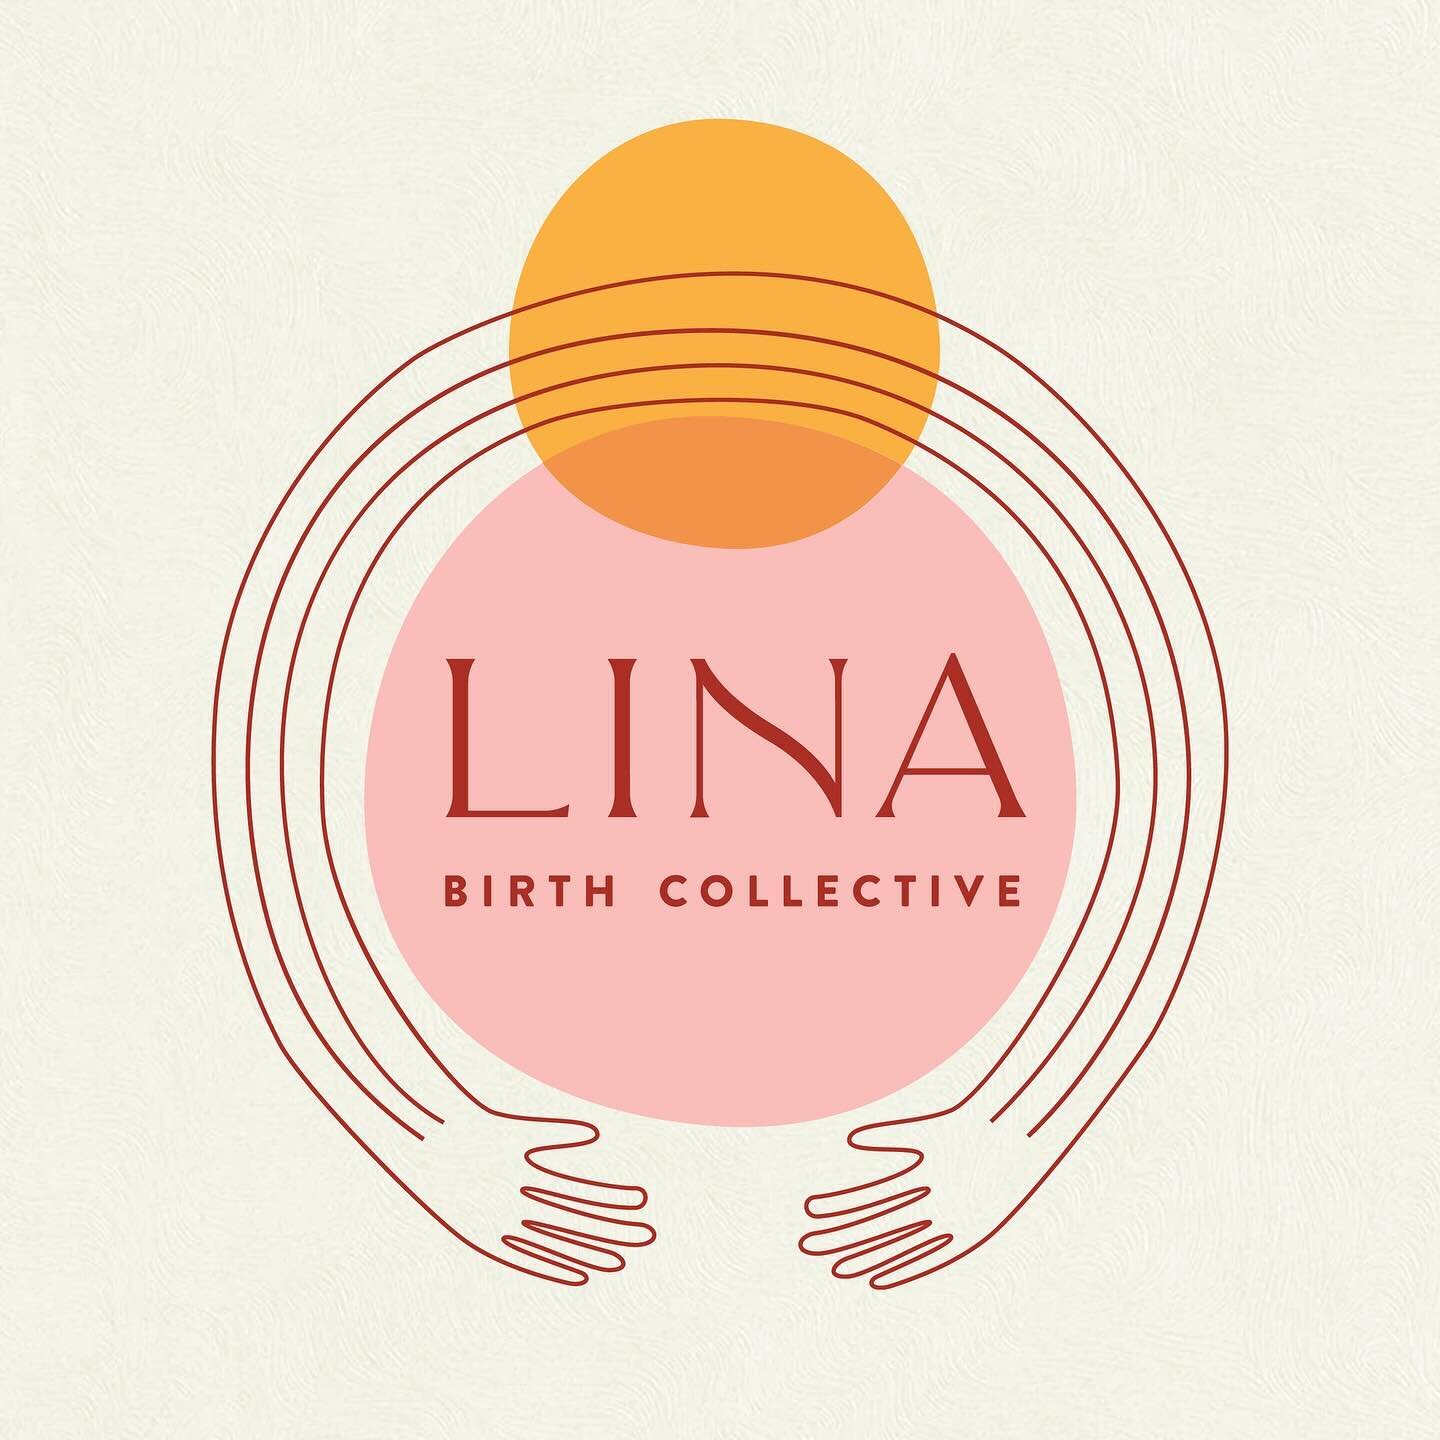 And here it is, the brand new bold and beautiful Lina Birth Collective identity! Join me in congratulating these amazing women on officially opening their doors earlier this year. To learn more about the pregnancy, birthing, and postpartum services t